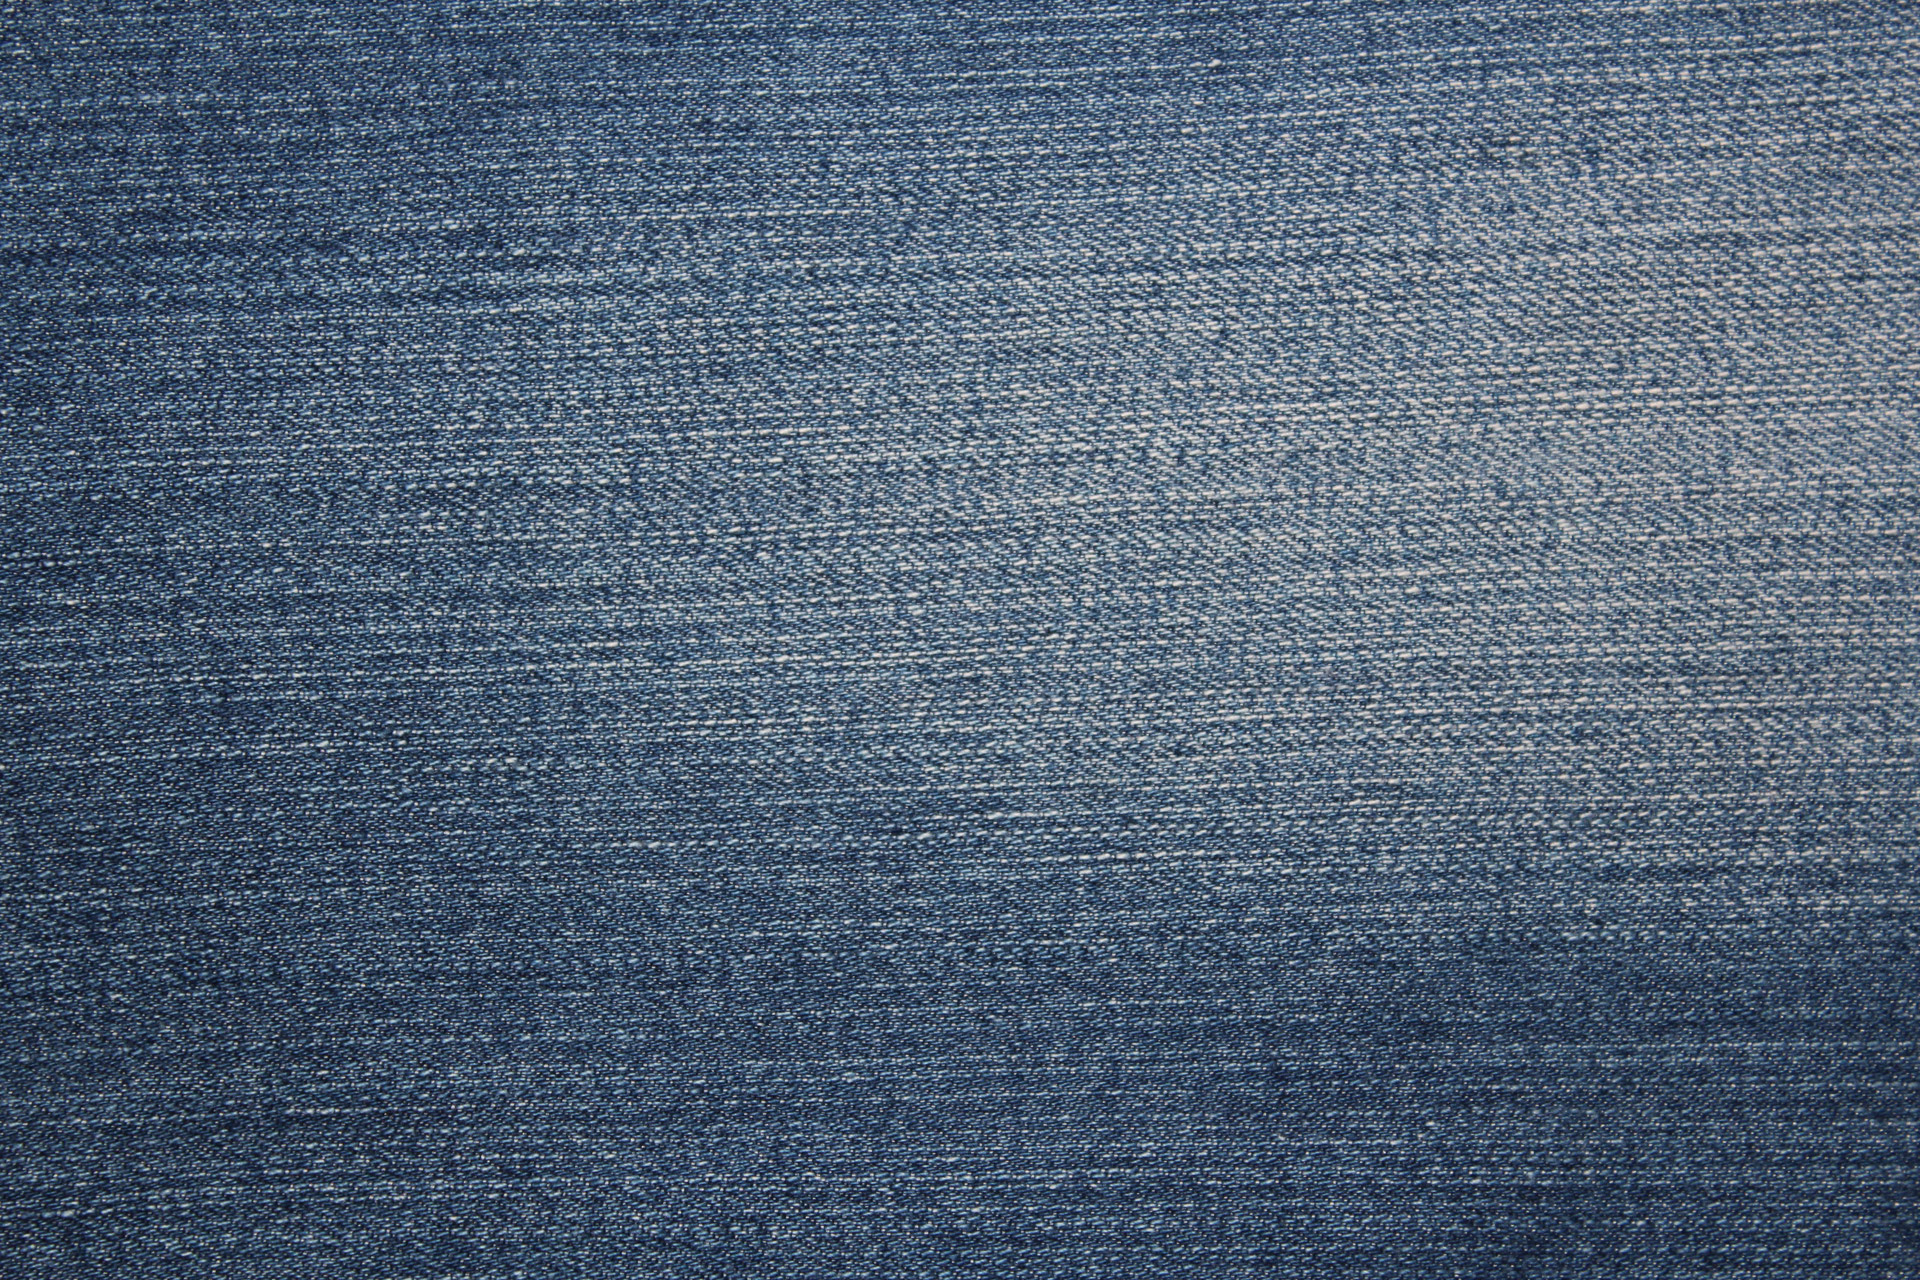 Denim Background Free Stock Photo Public Domain Pictures HD Wallpapers Download Free Images Wallpaper [wallpaper981.blogspot.com]